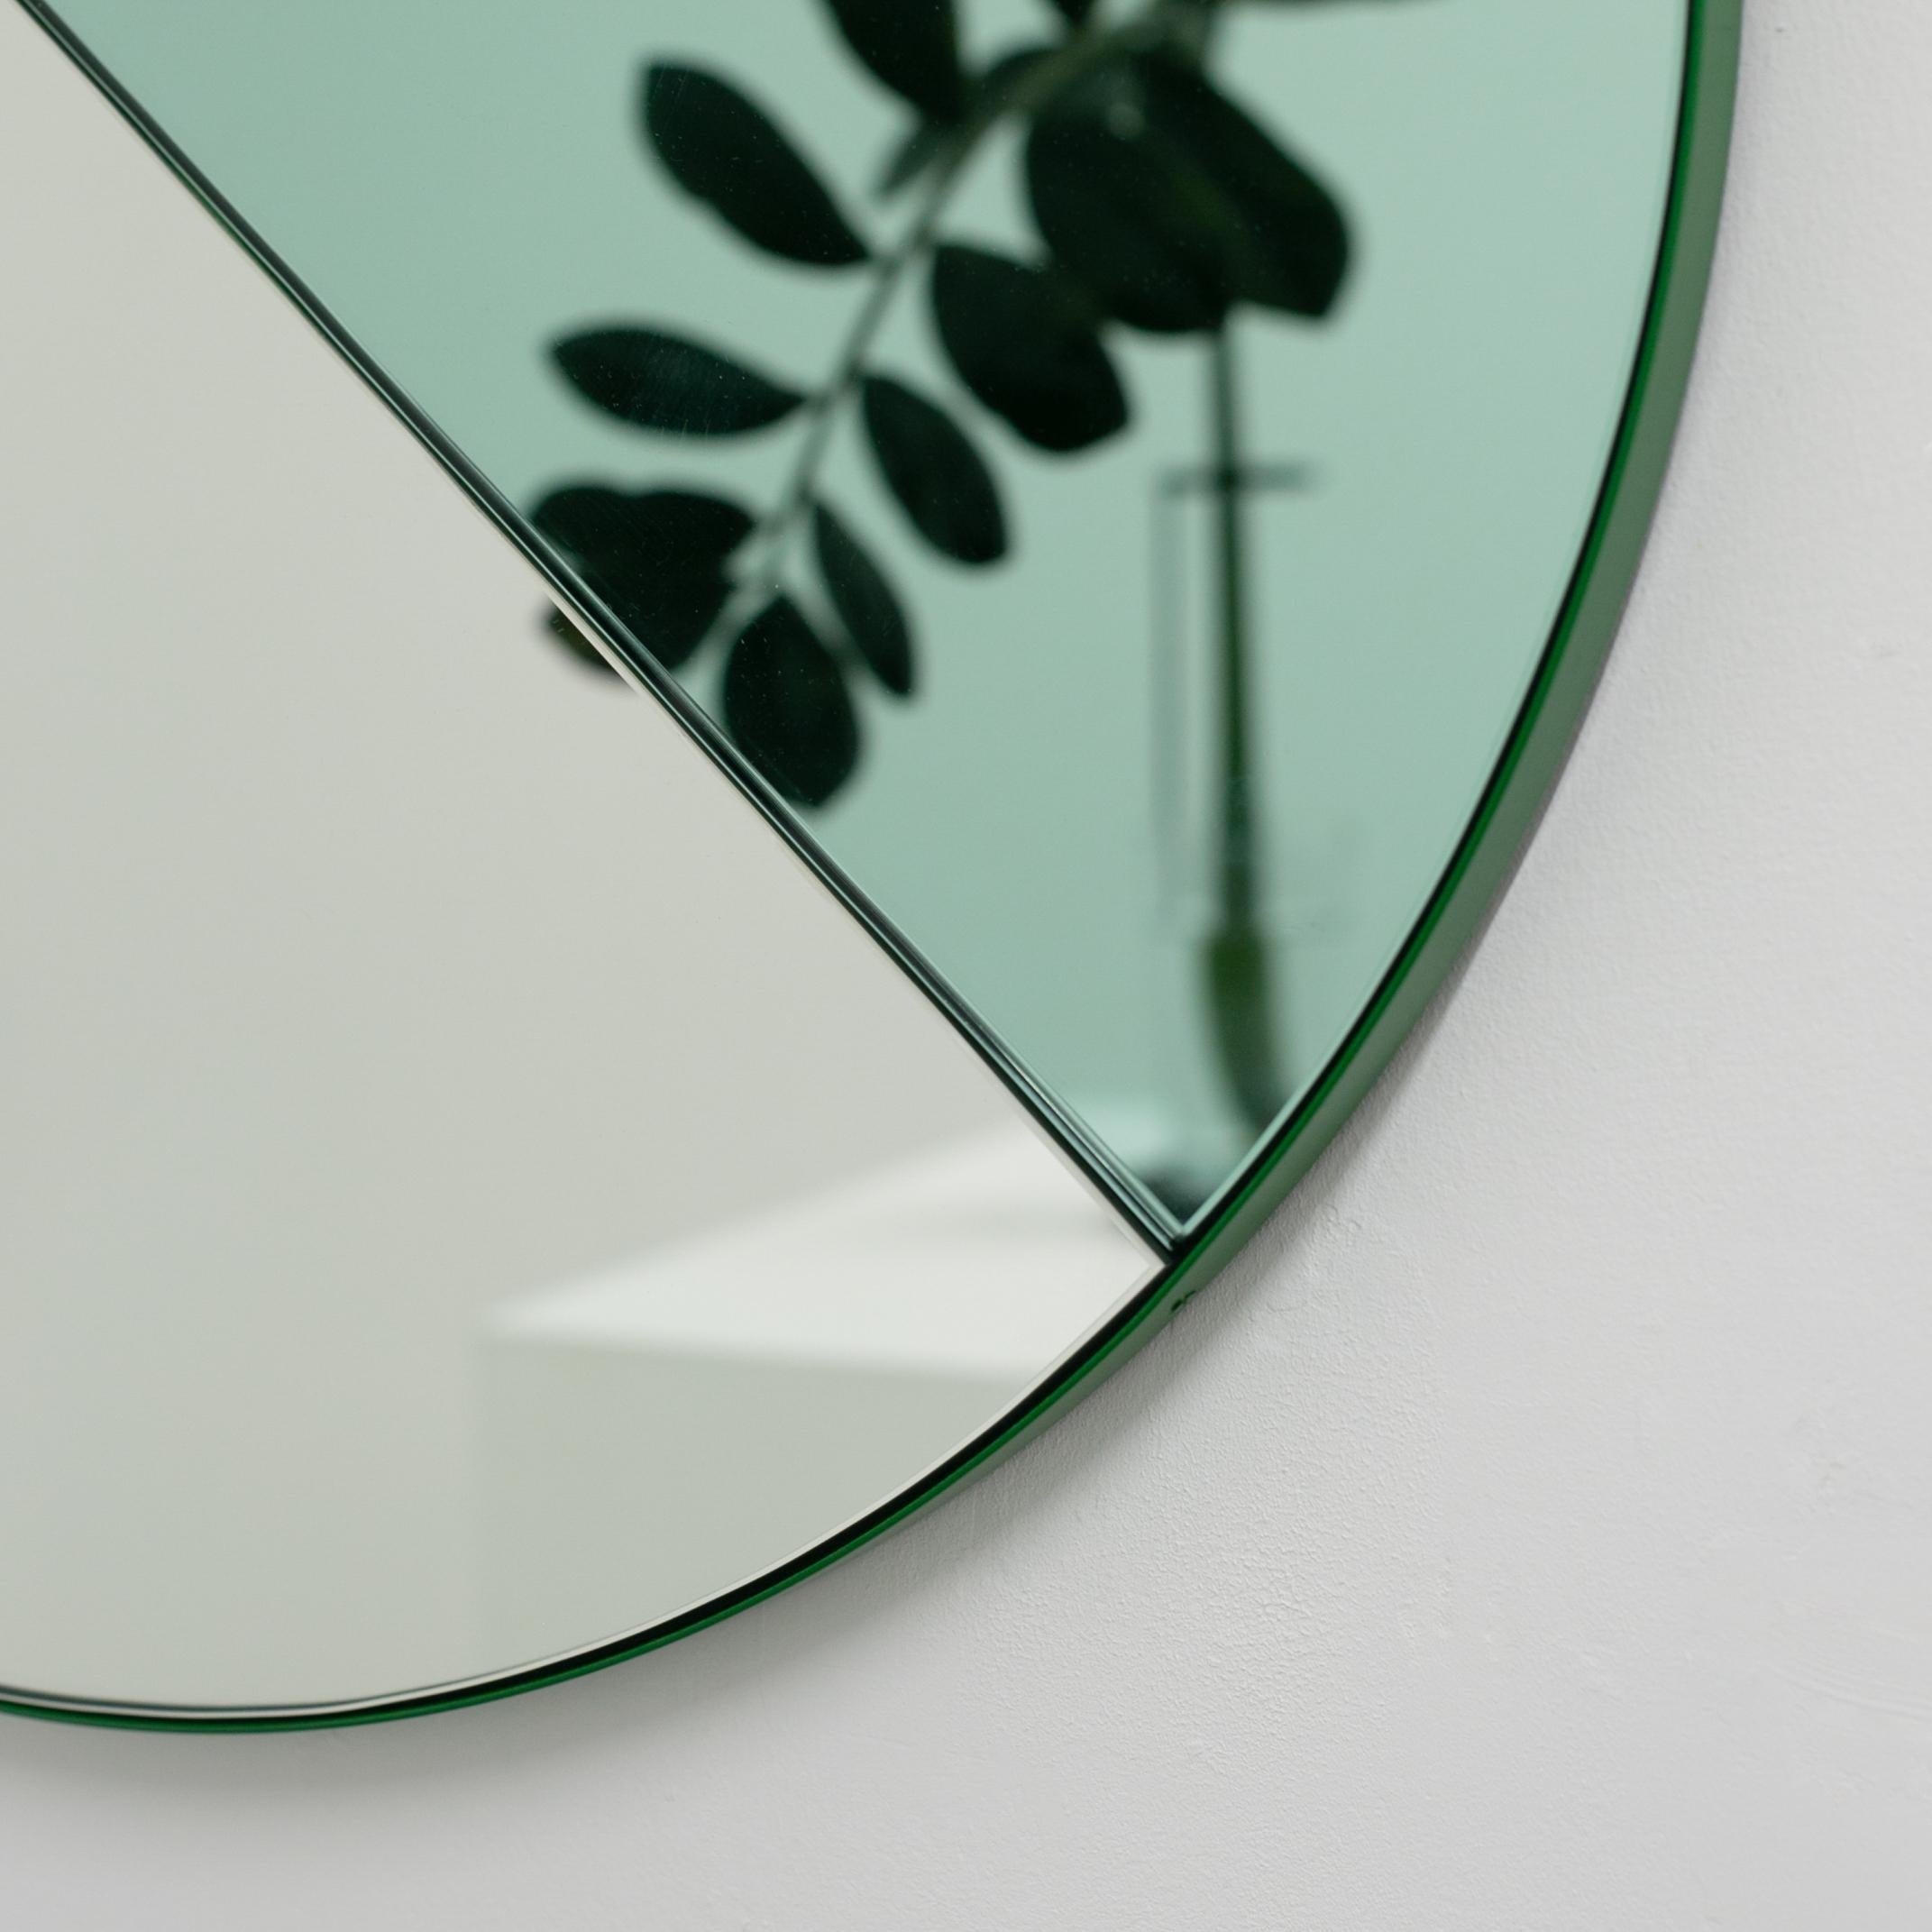 Orbis Dualis Mixed 'Green + Silver' Round Mirror with Green Frame, Large 1